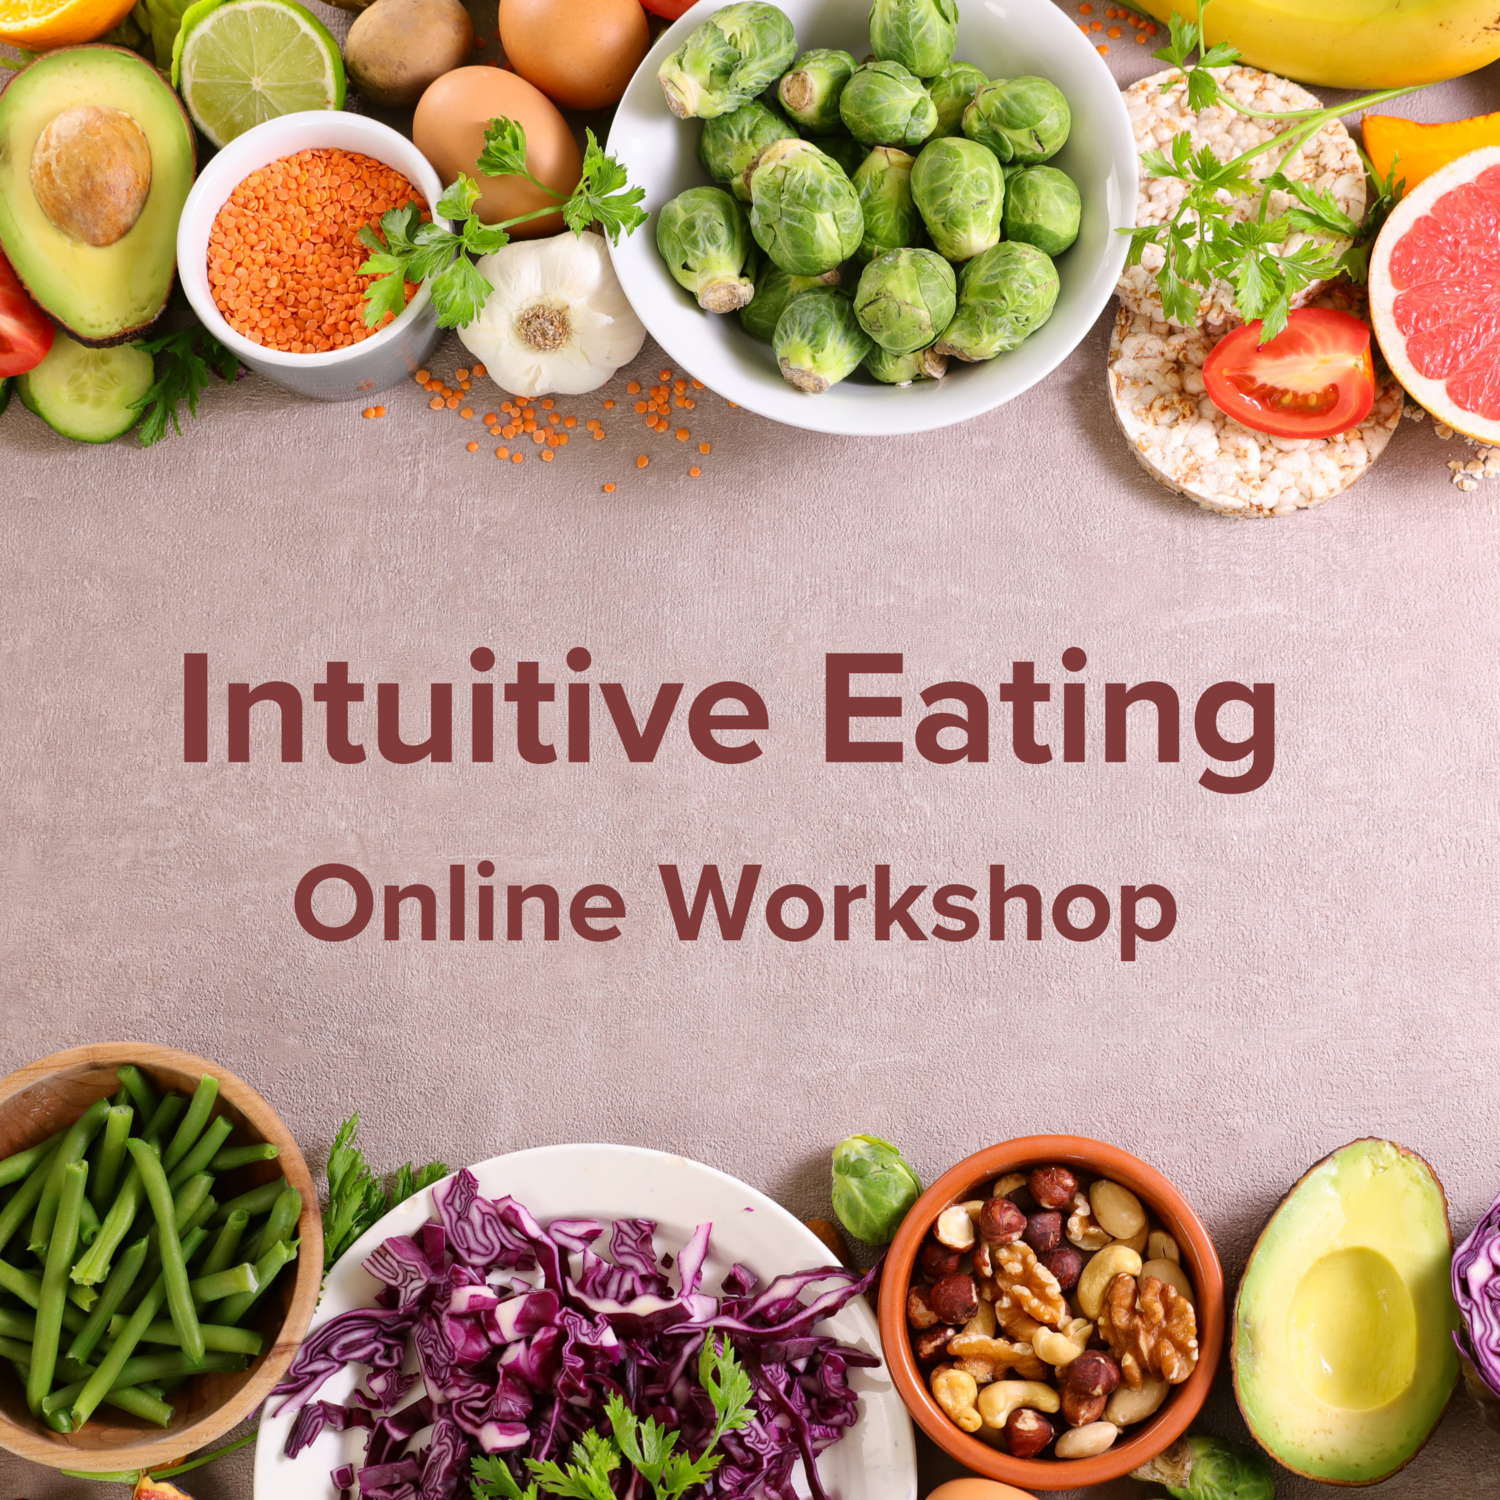 #Intuitive Eating Workshop - ONLINE
Sunday, 6 August (10:00 - 11:30)